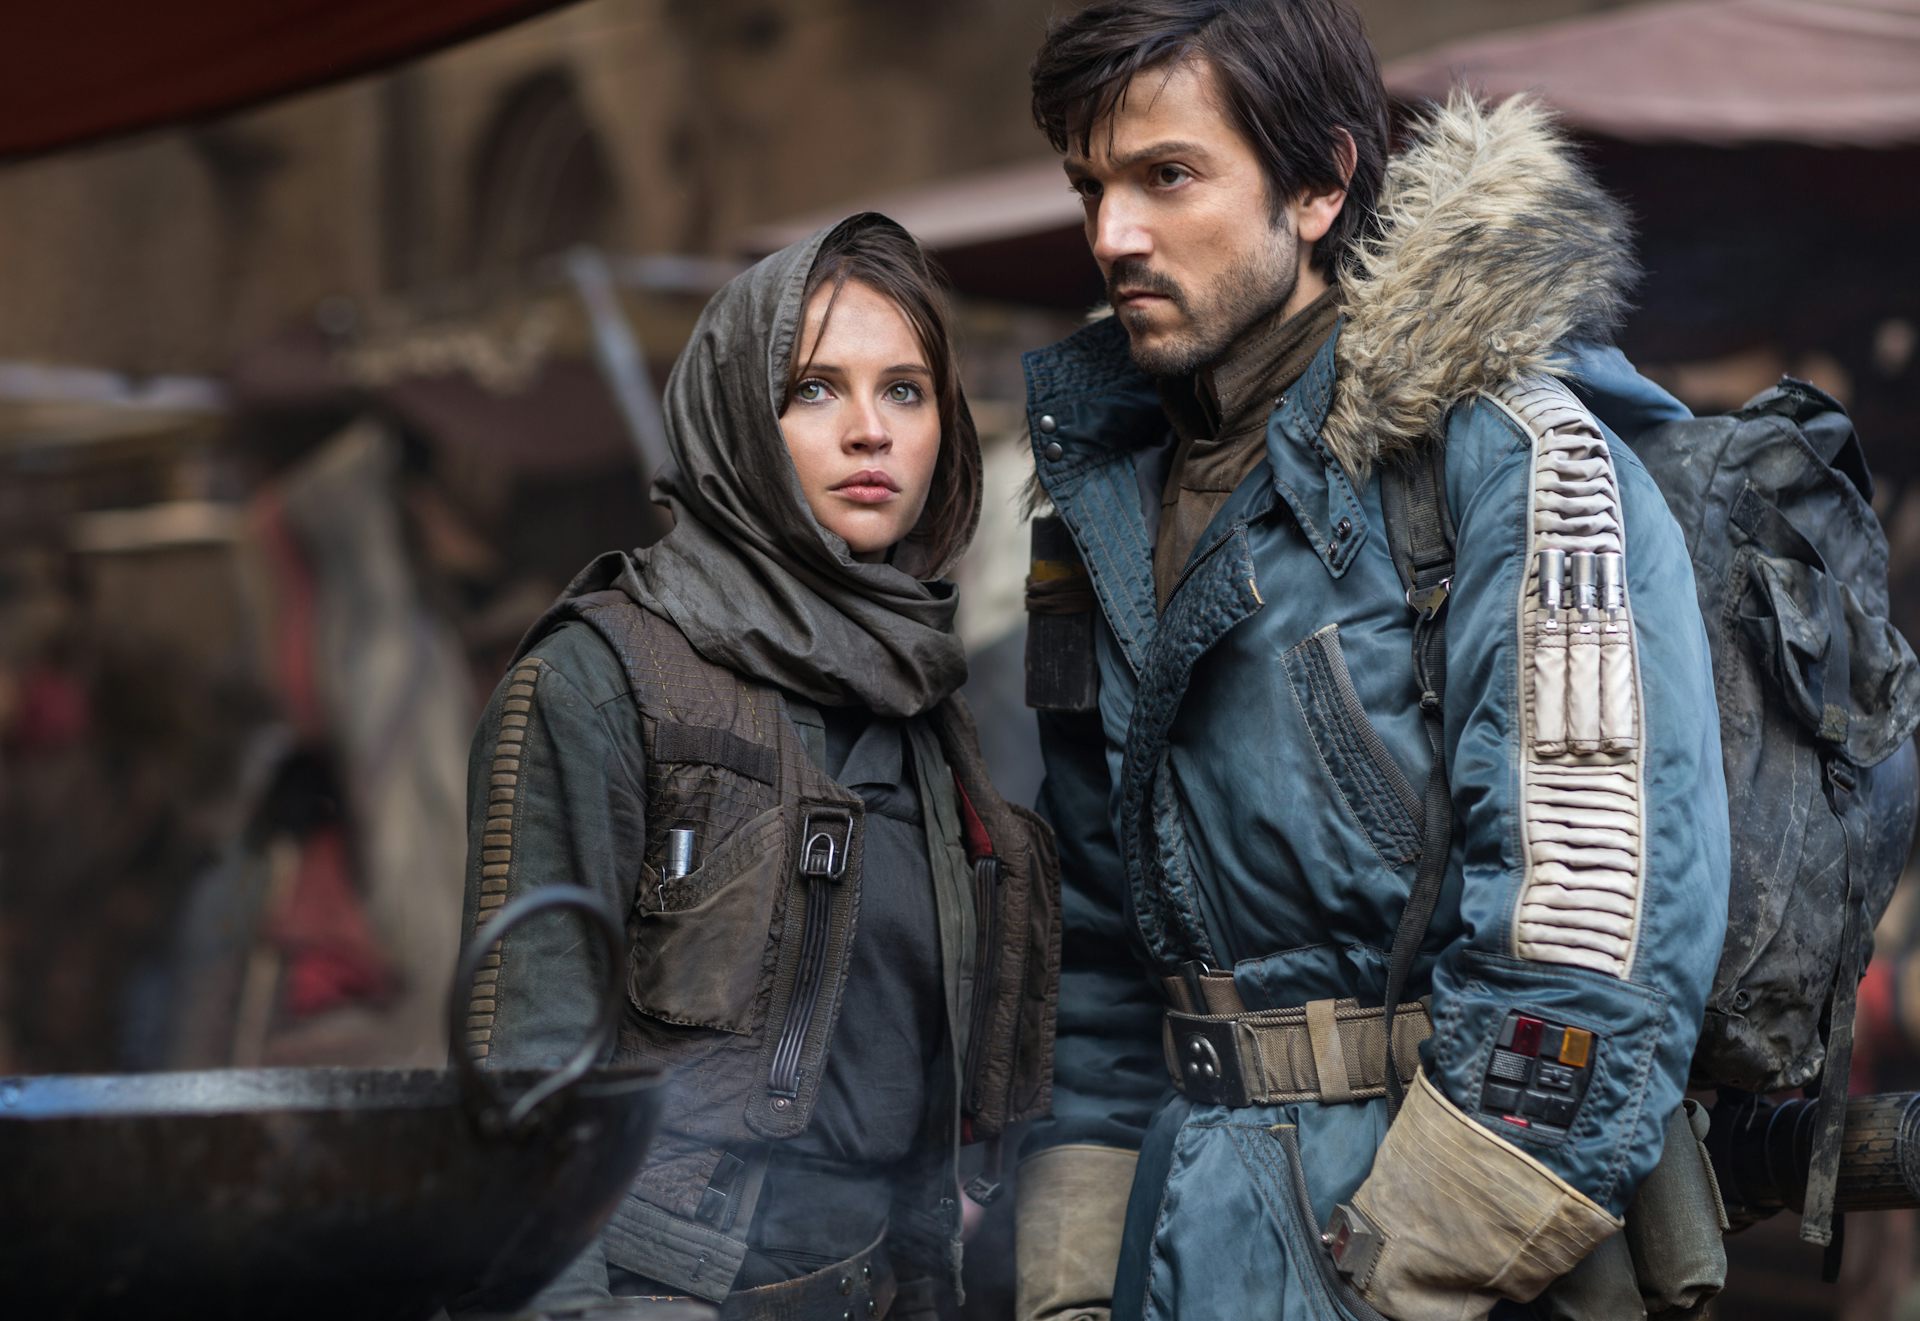 when does star wars a rogue one come out